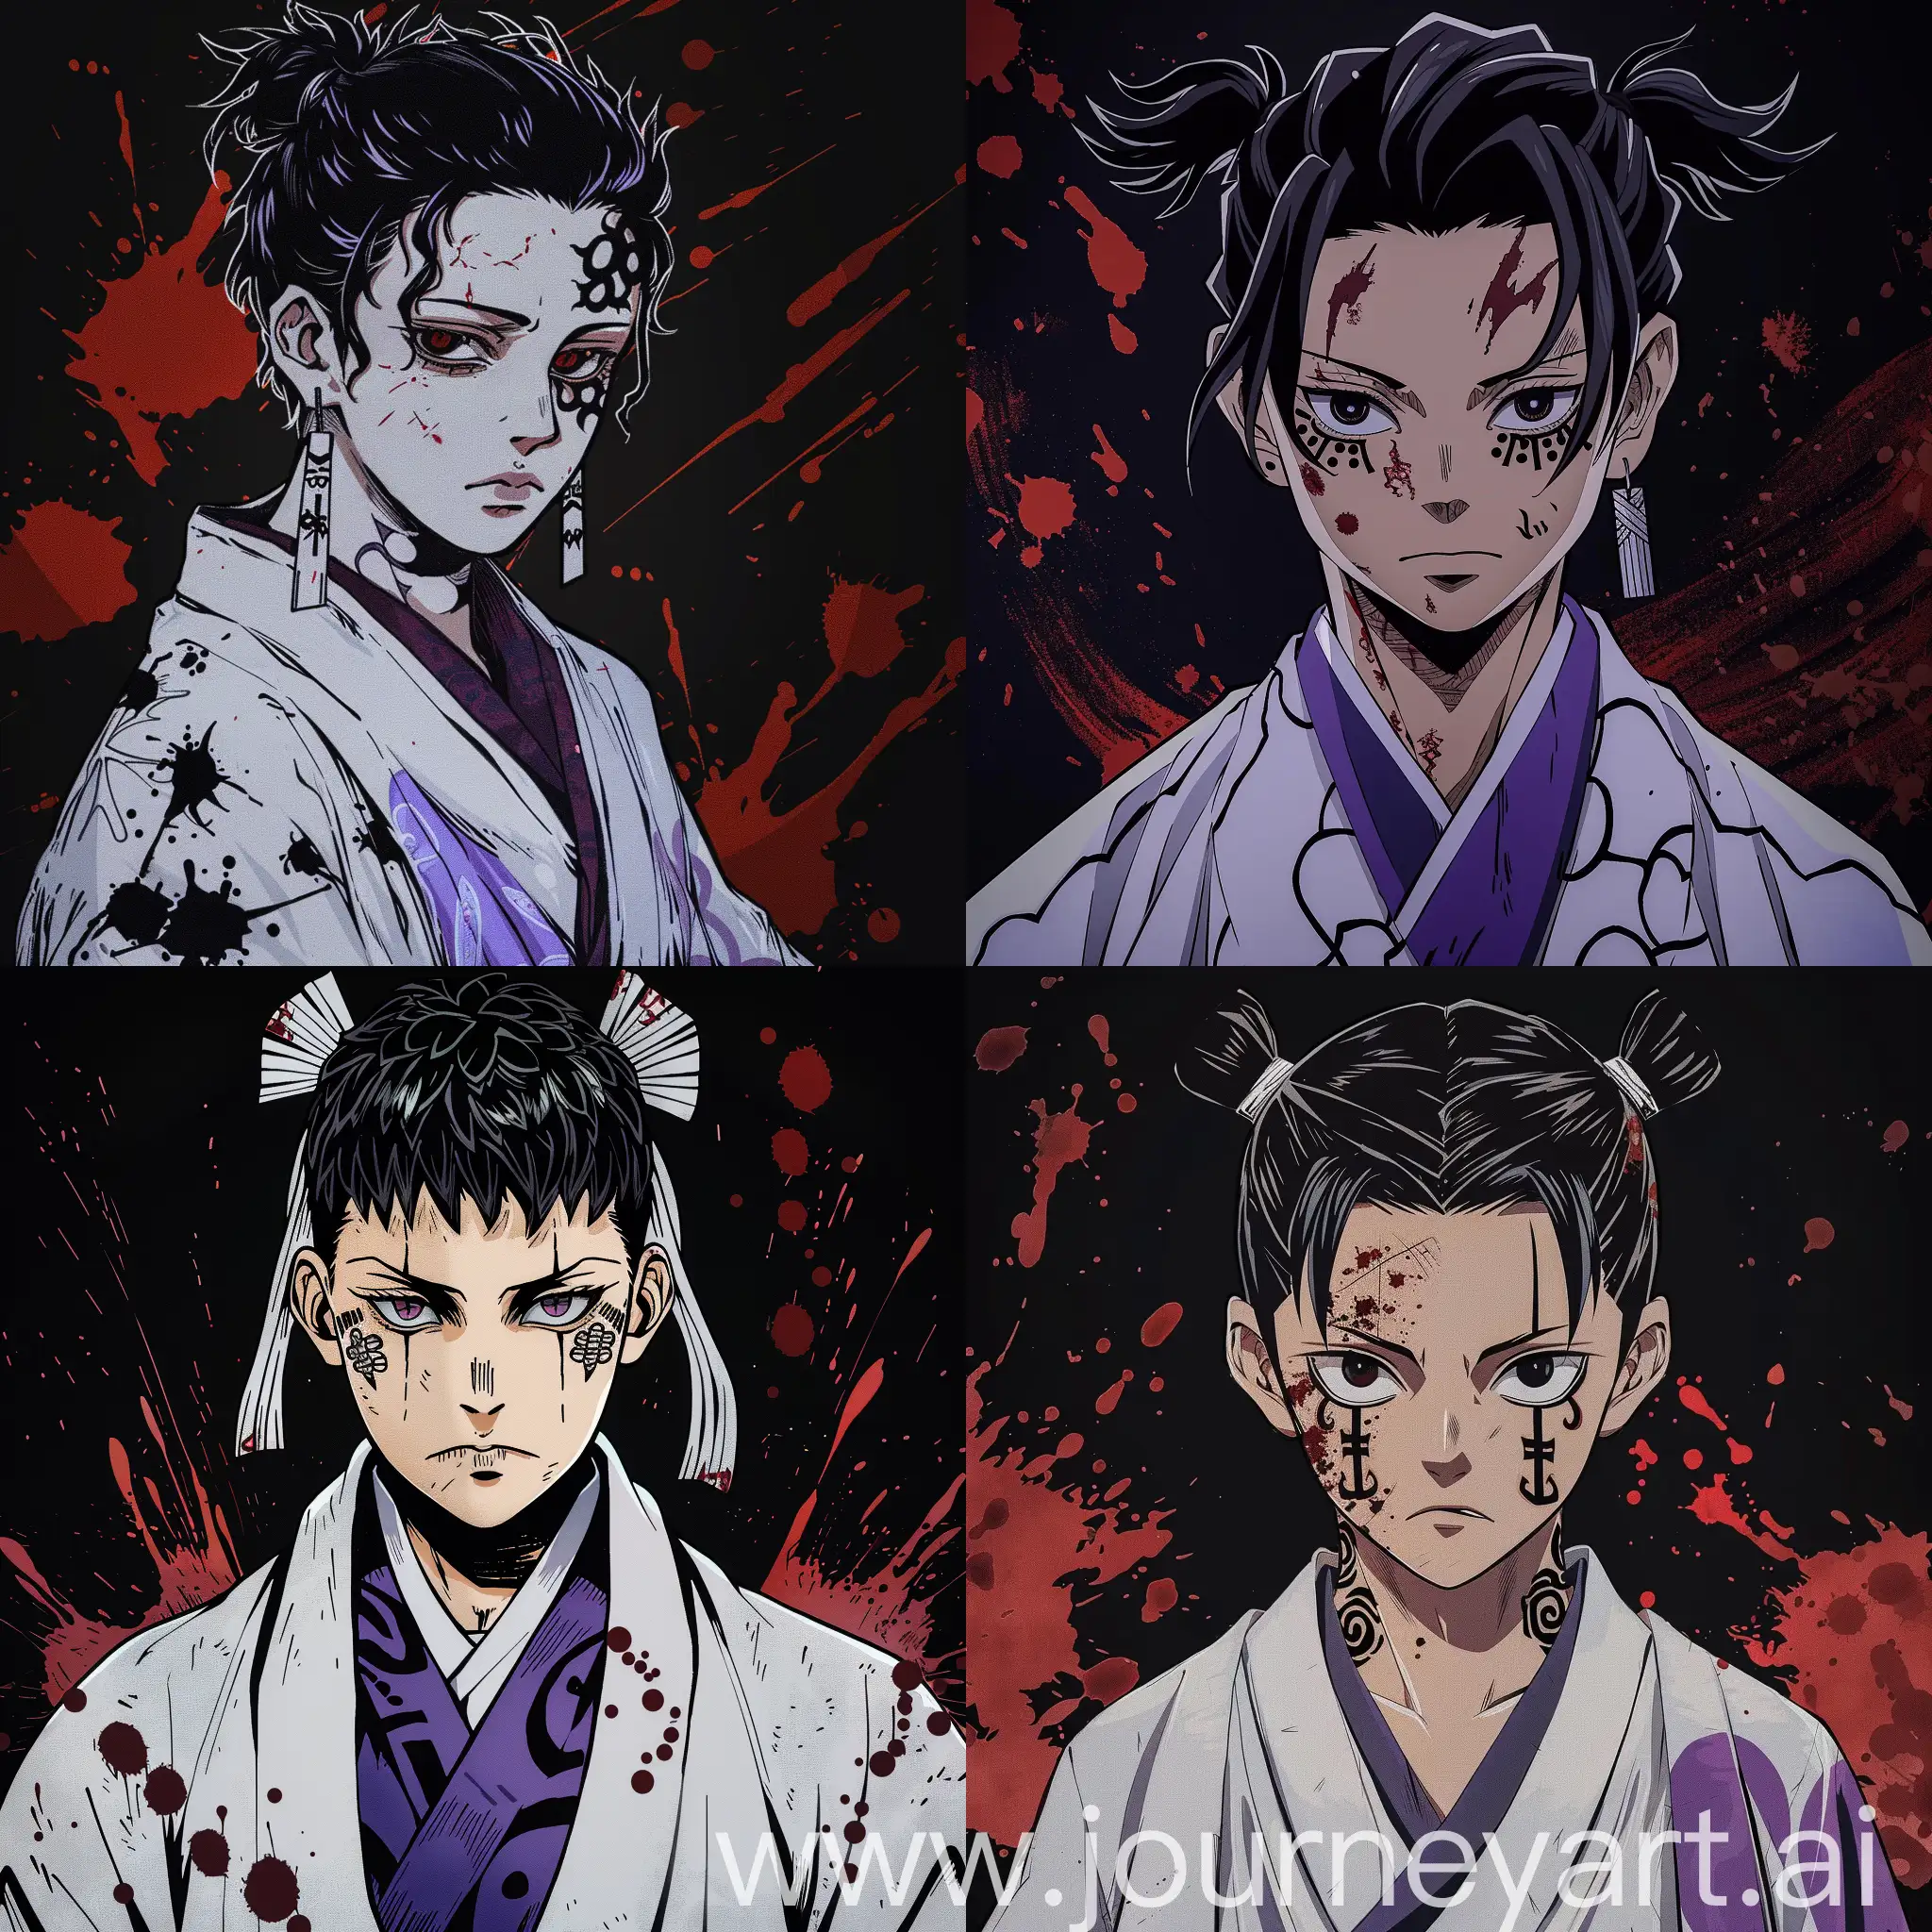 Draw a Choso from the anime Jujutsu Kaisen. Dark hair with two short ponytails, in a white and purple kimono, black patterns on his face and blood magic. On a black background with red splashes of blood